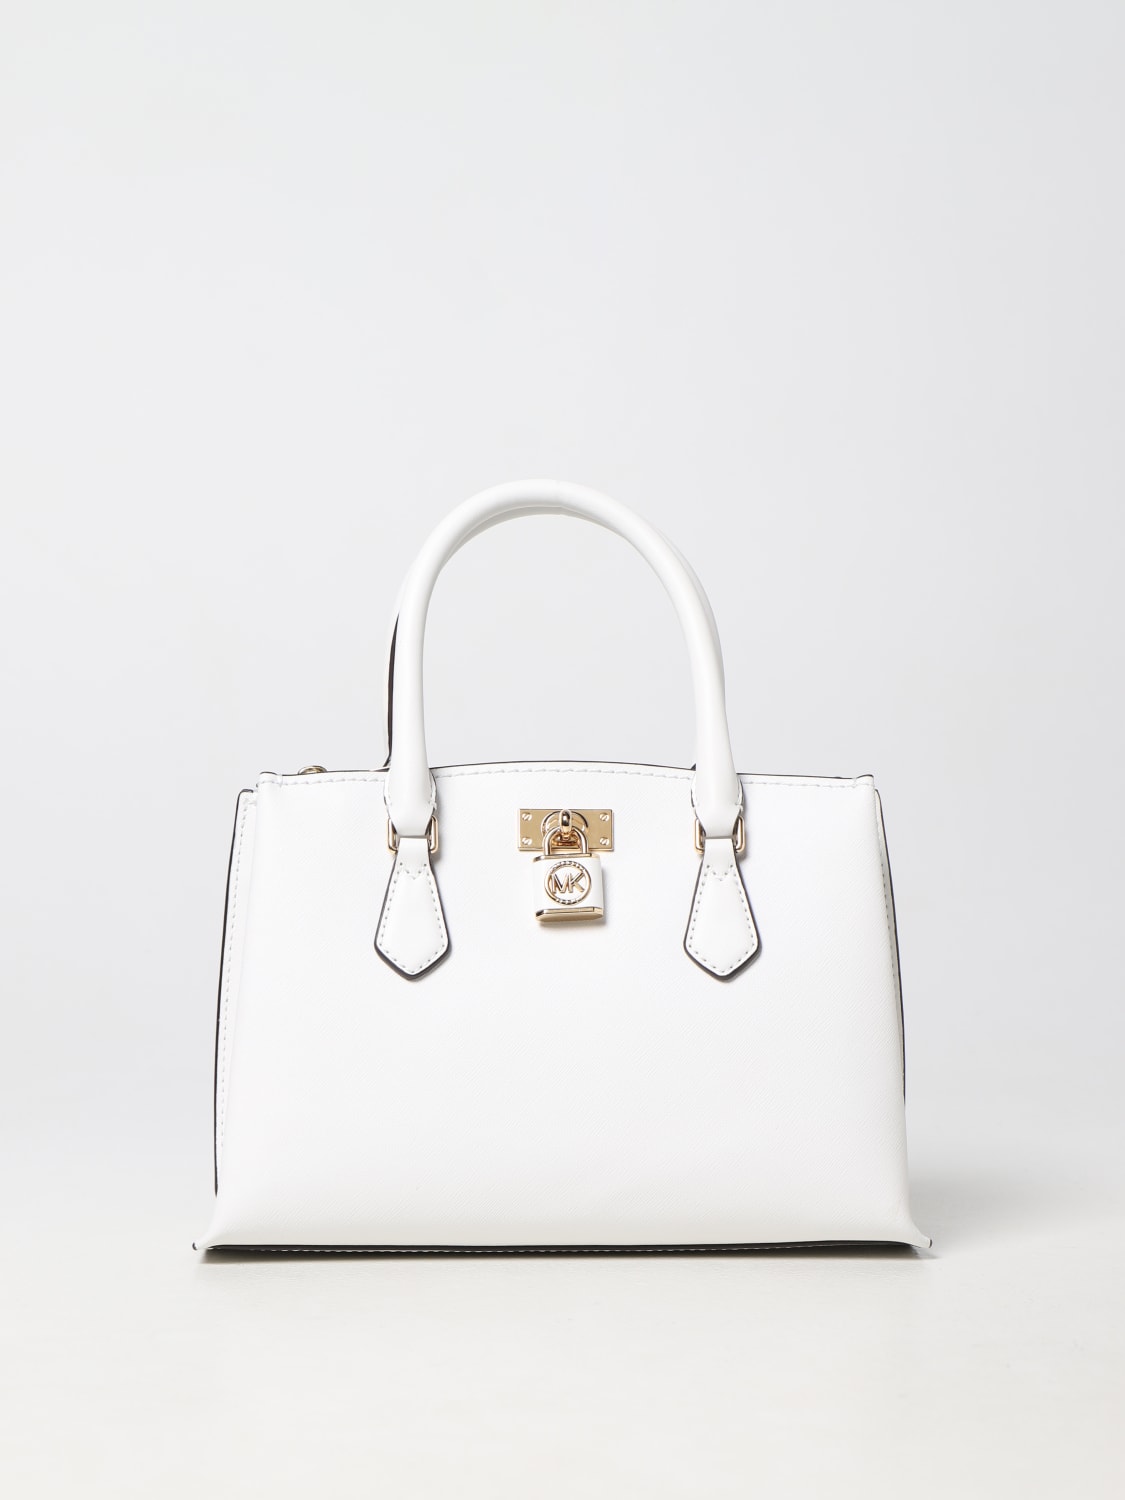 Michael Kors Outlet: Michael bag in saffiano leather - White